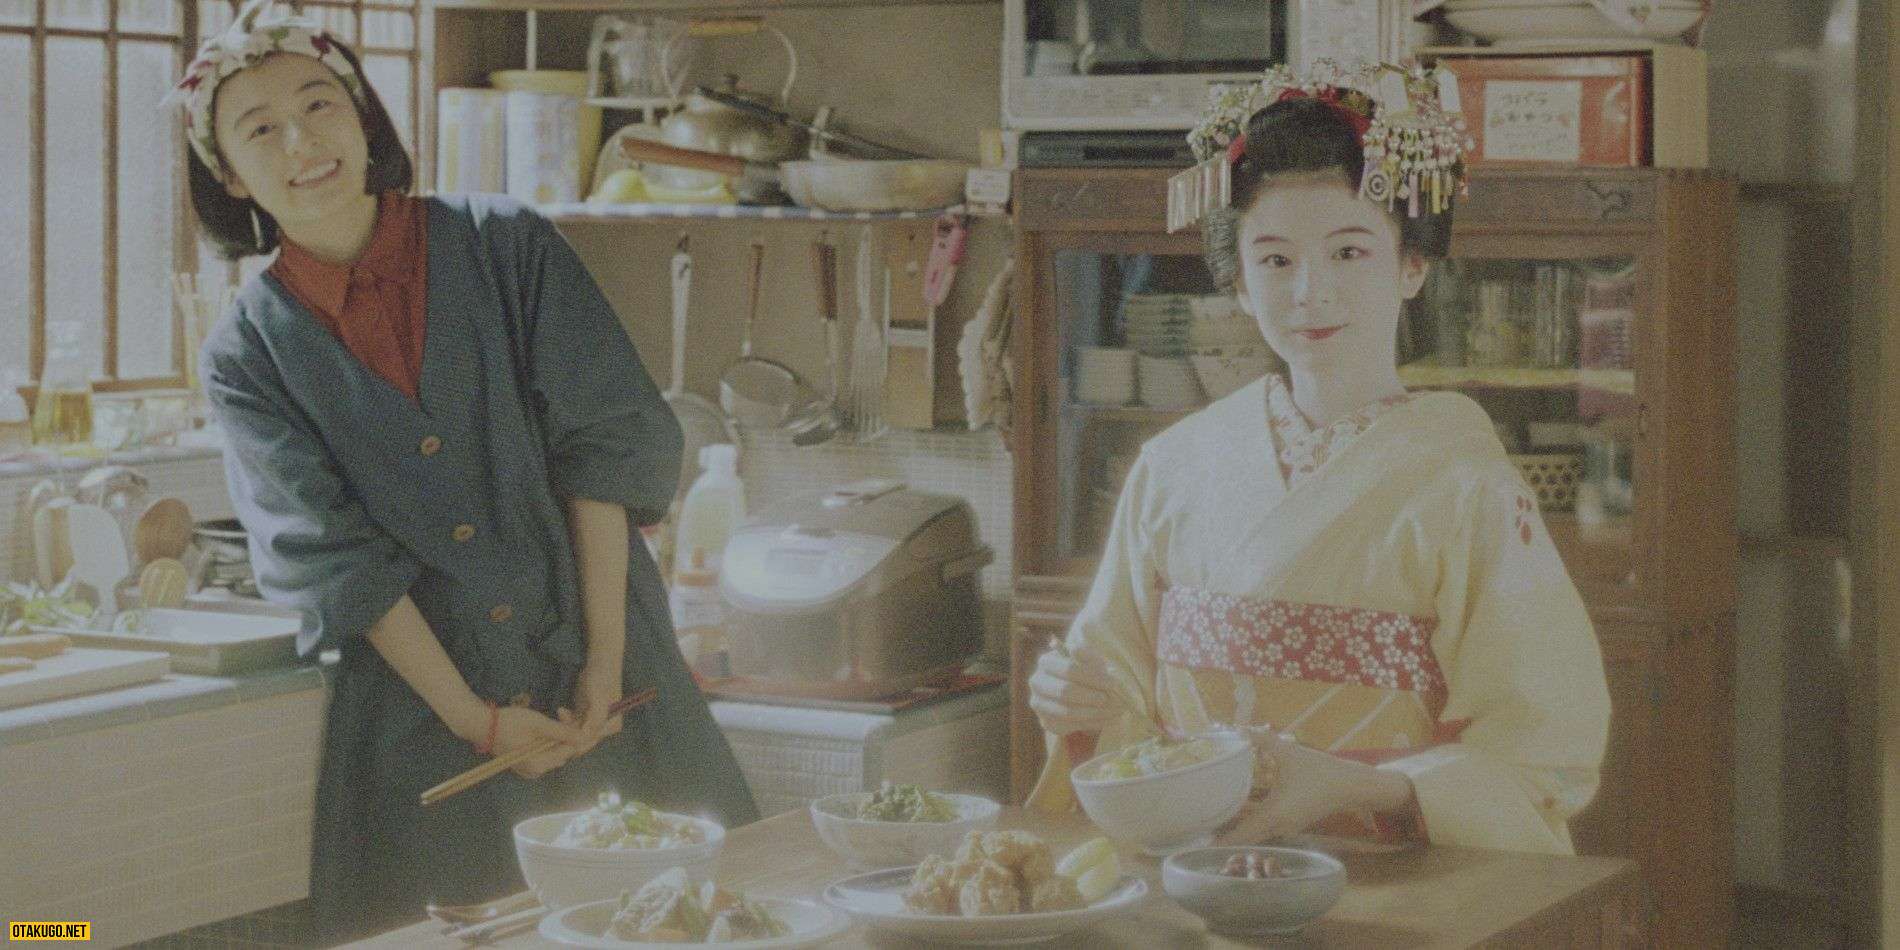 Makanai Cooking for the Maiko House cho thay Netflix co